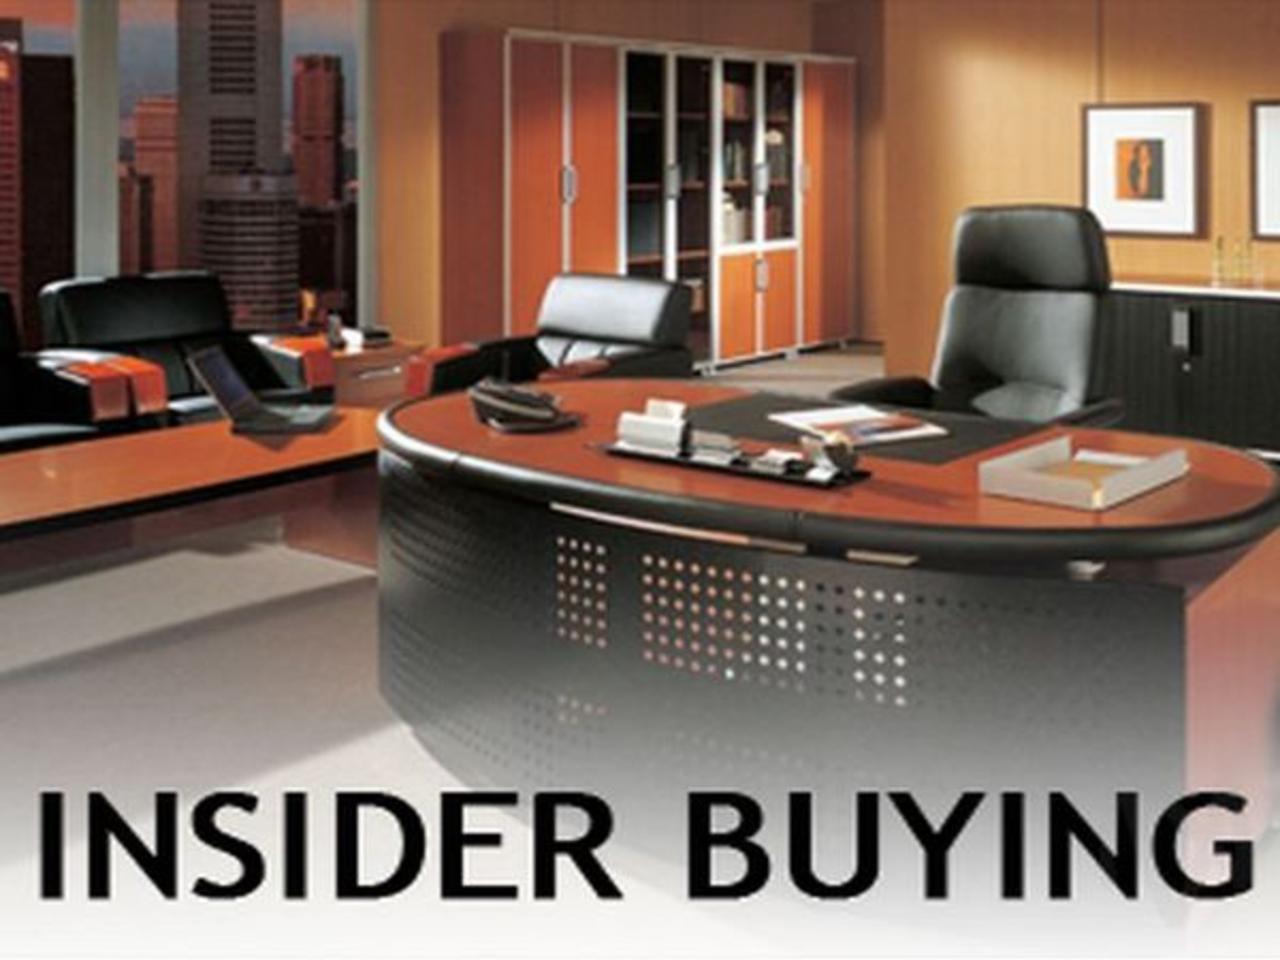 Tuesday 11/9 Insider Buying Report: TCBI, BBBY